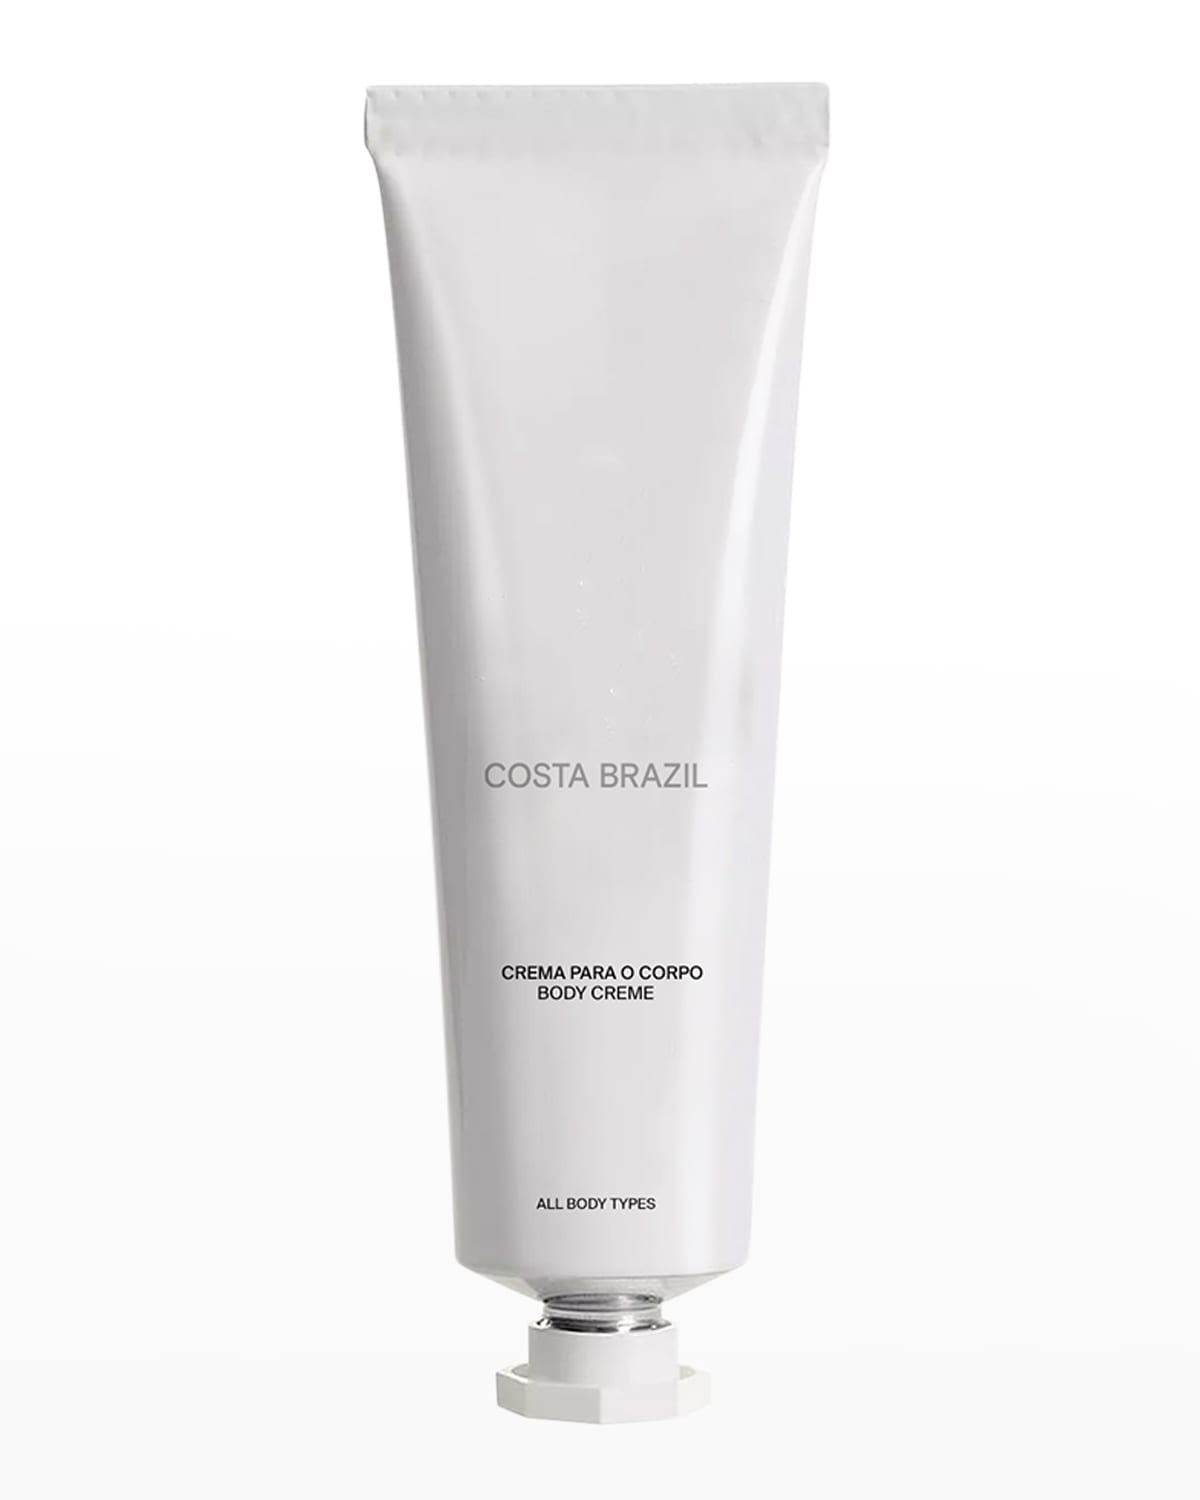 Creme Para o Corpo Body Cream, Yours with any $200 Costa Brazil Purchase